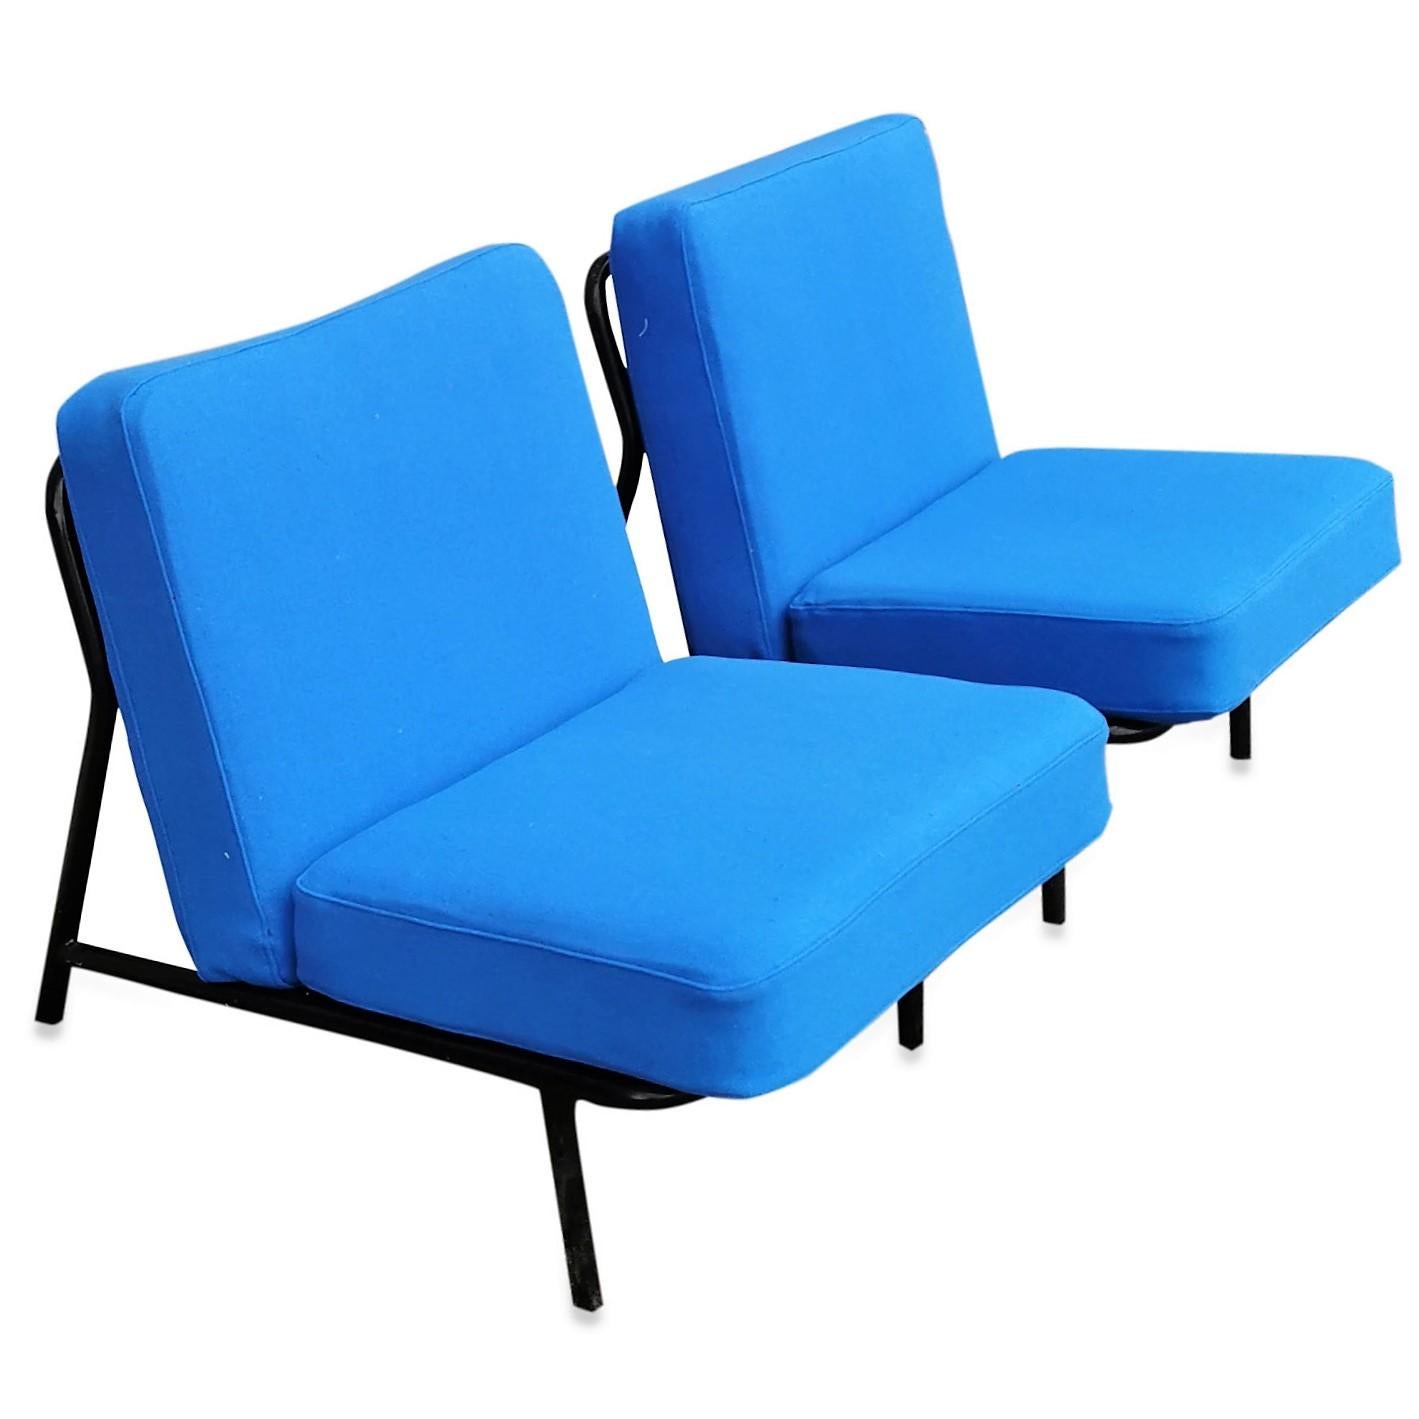 Enameled Artifort Pair of Minimalist Recliners, Netherlands, 1960s For Sale